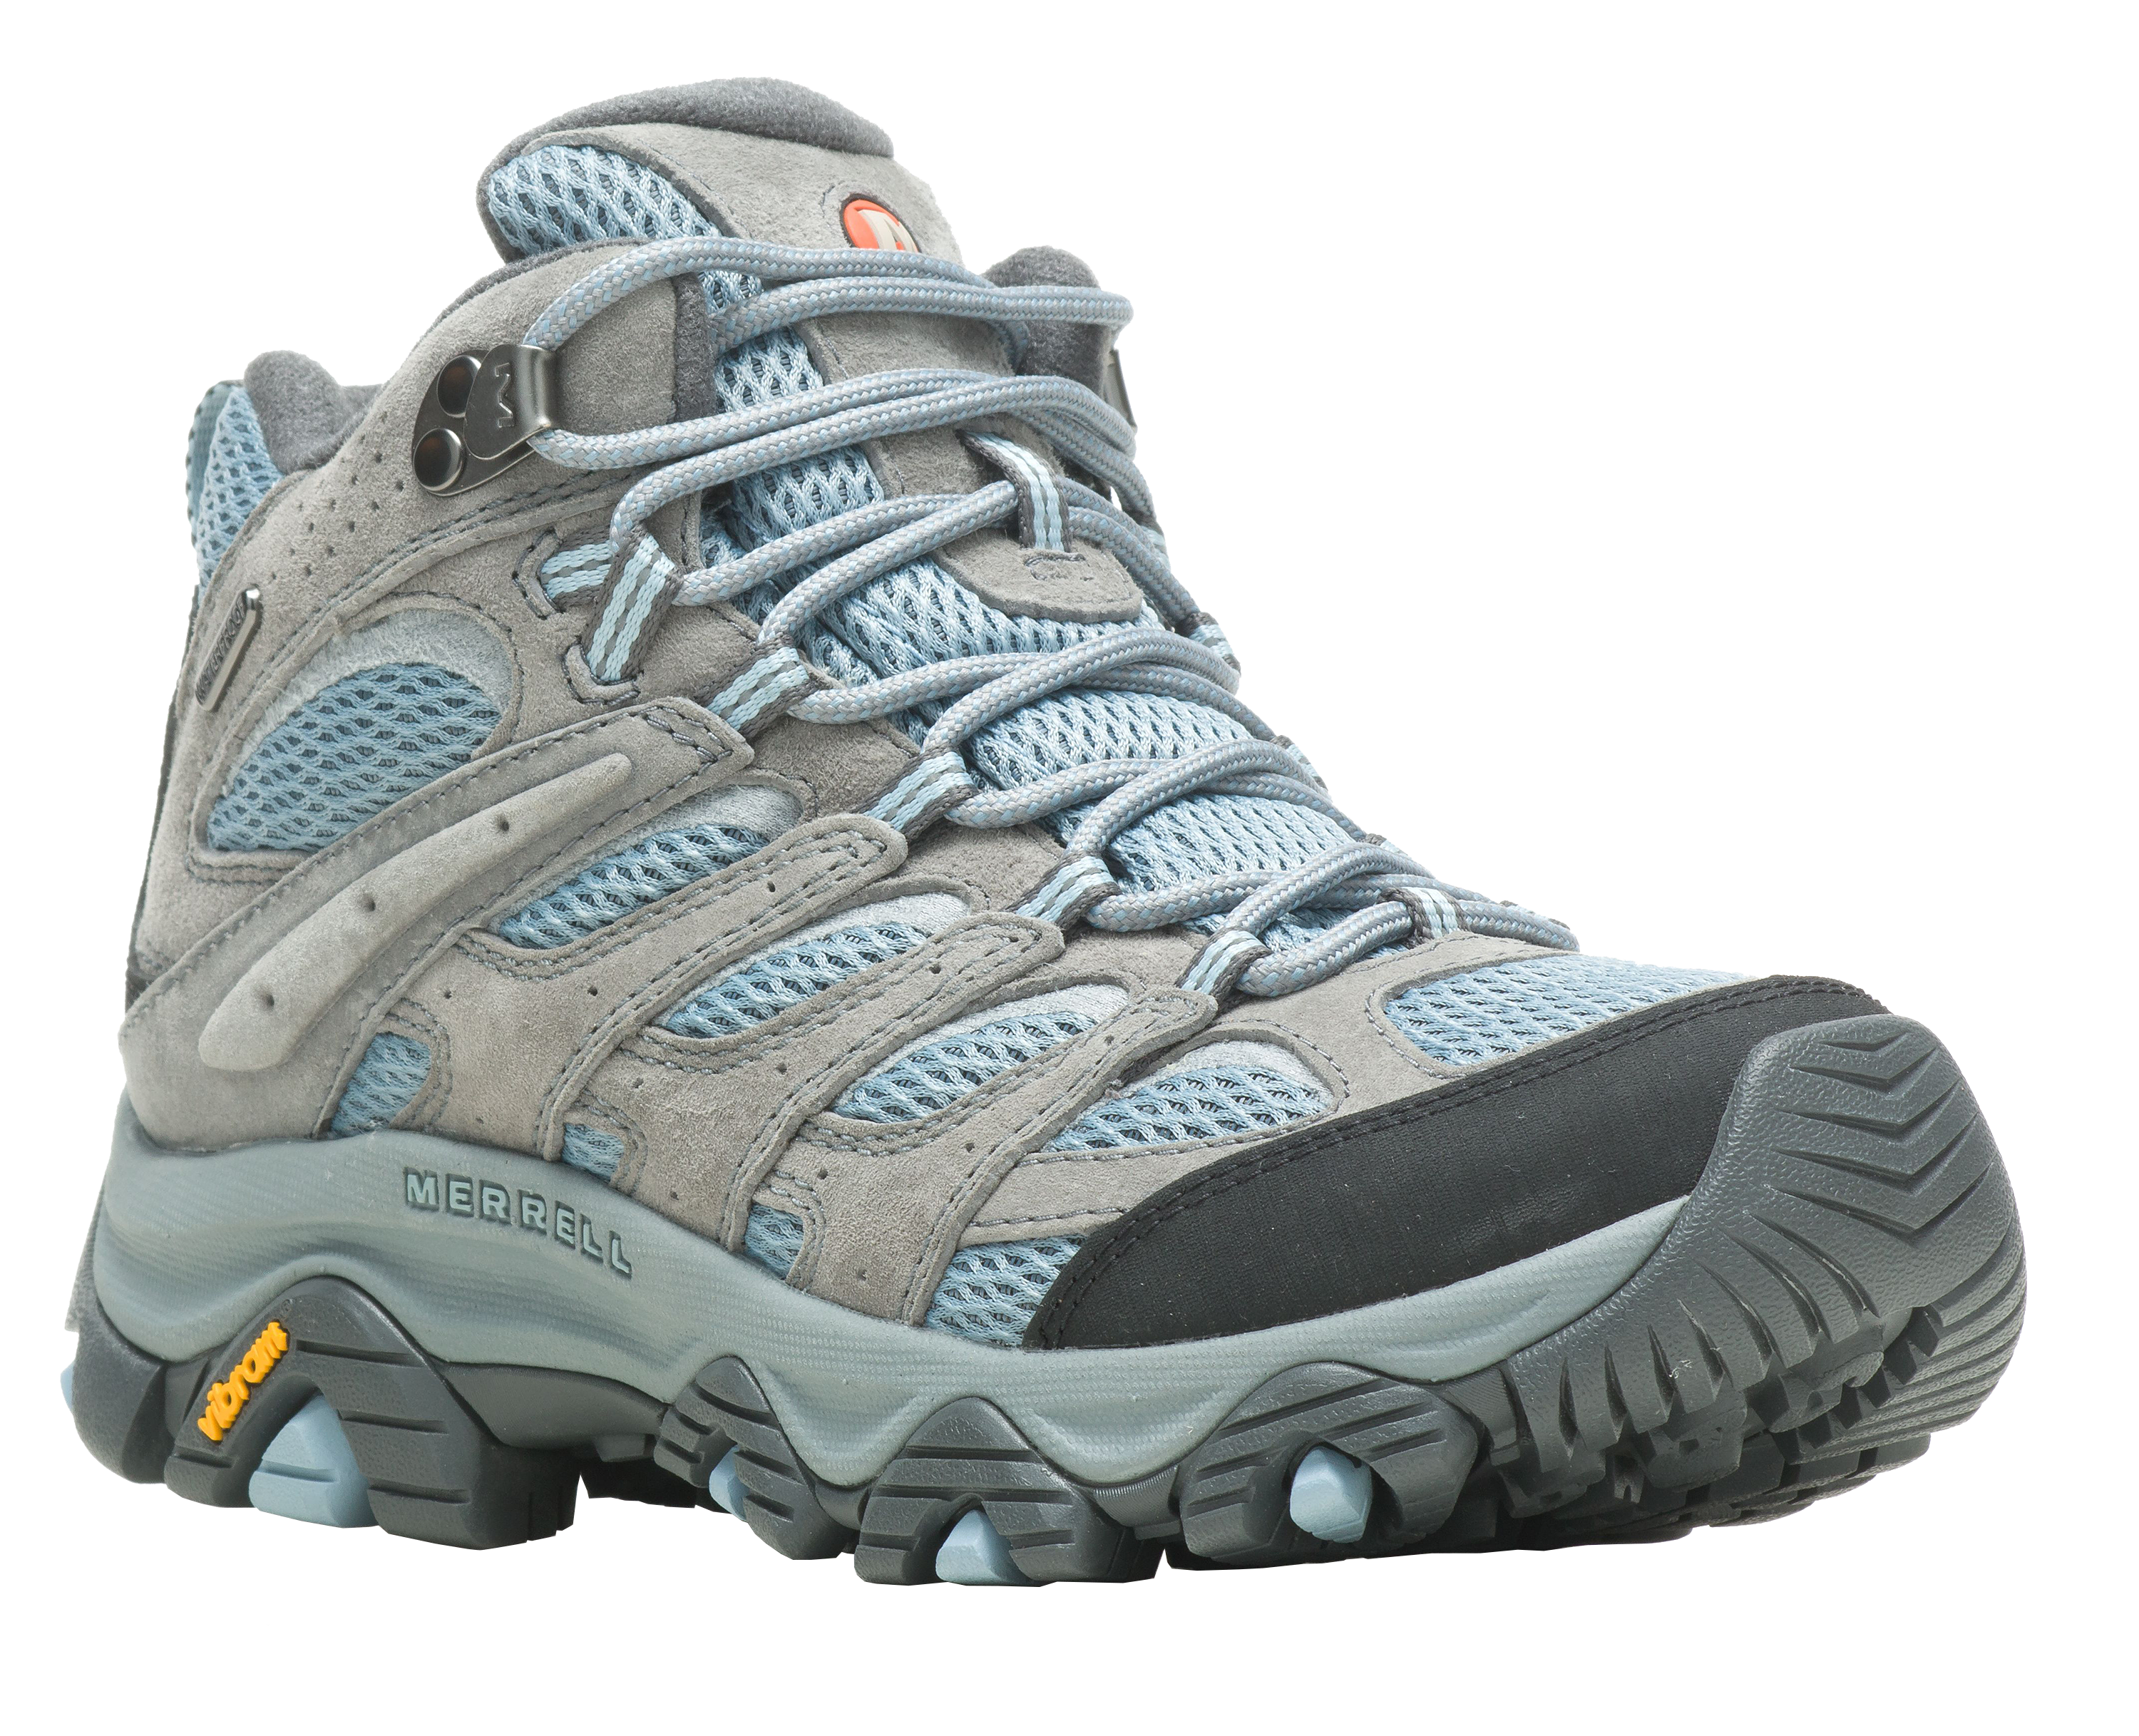 Merrell Moab Mid Waterproof Hiking Boots for Ladies | Cabela's